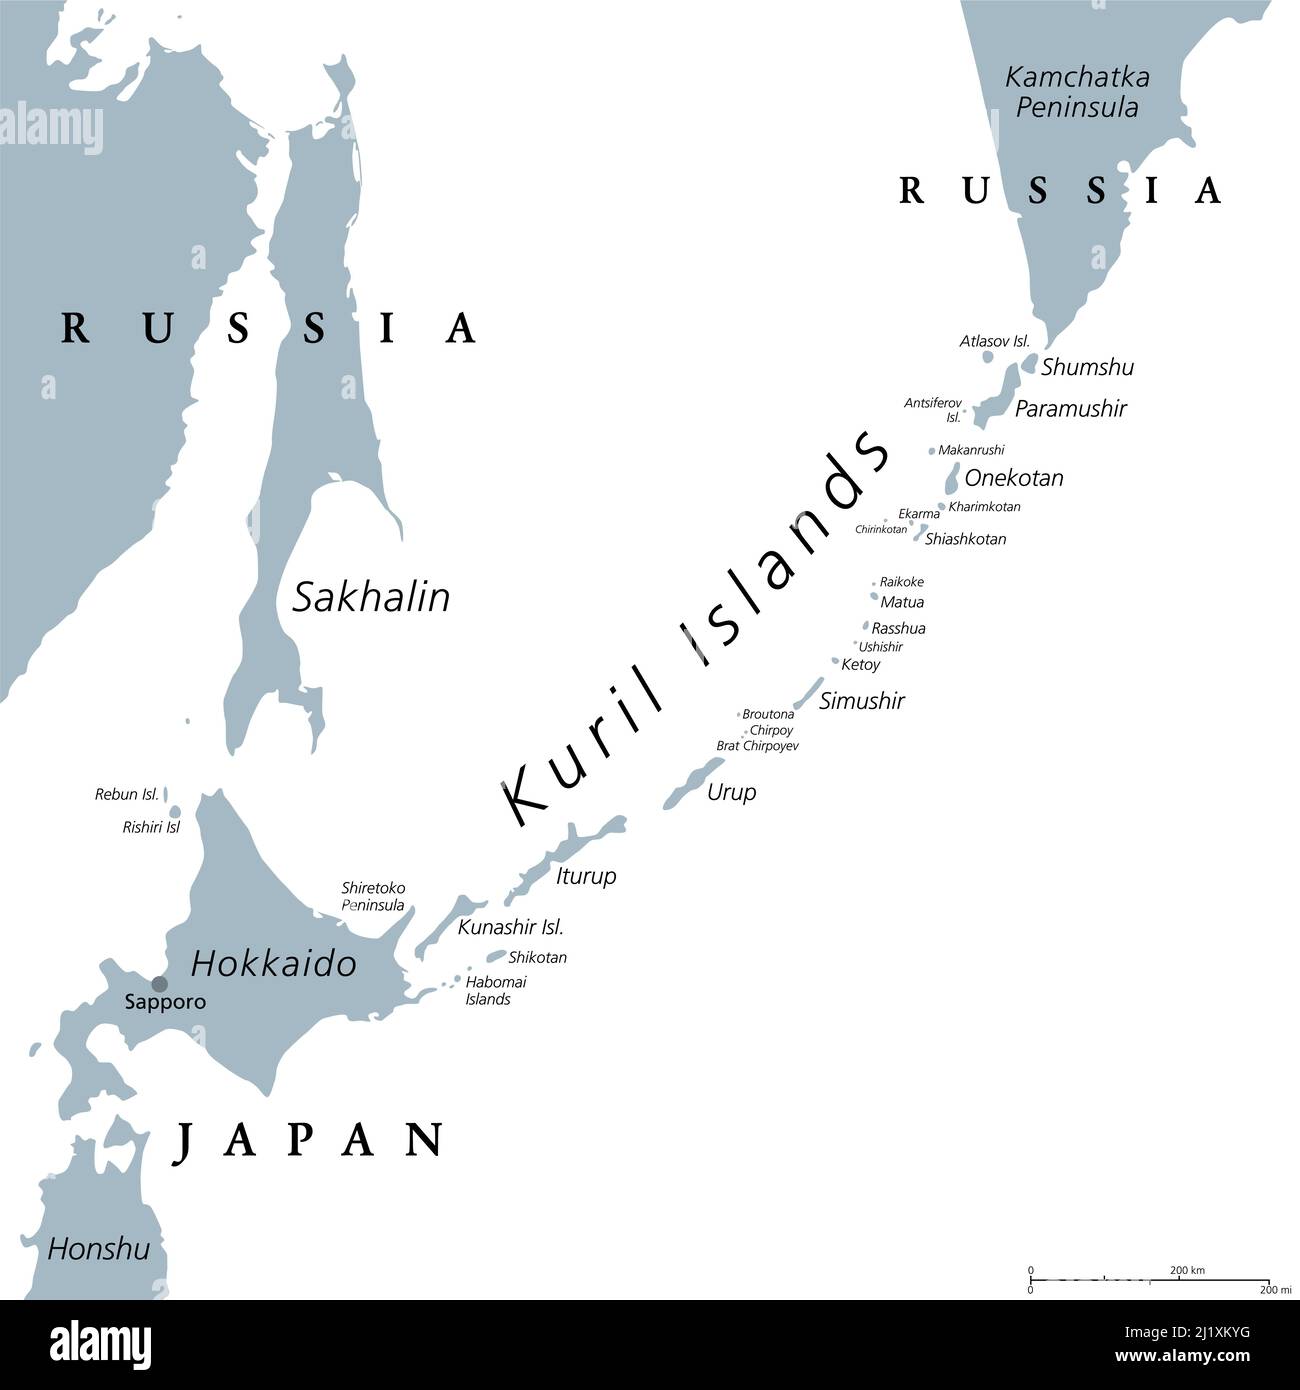 Kuril Islands, gray political map. A volcanic archipelago part of Sakhalin Oblast in Russian Far East. Stretches from Hokkaido in Japan to Kamchatka. Stock Photo